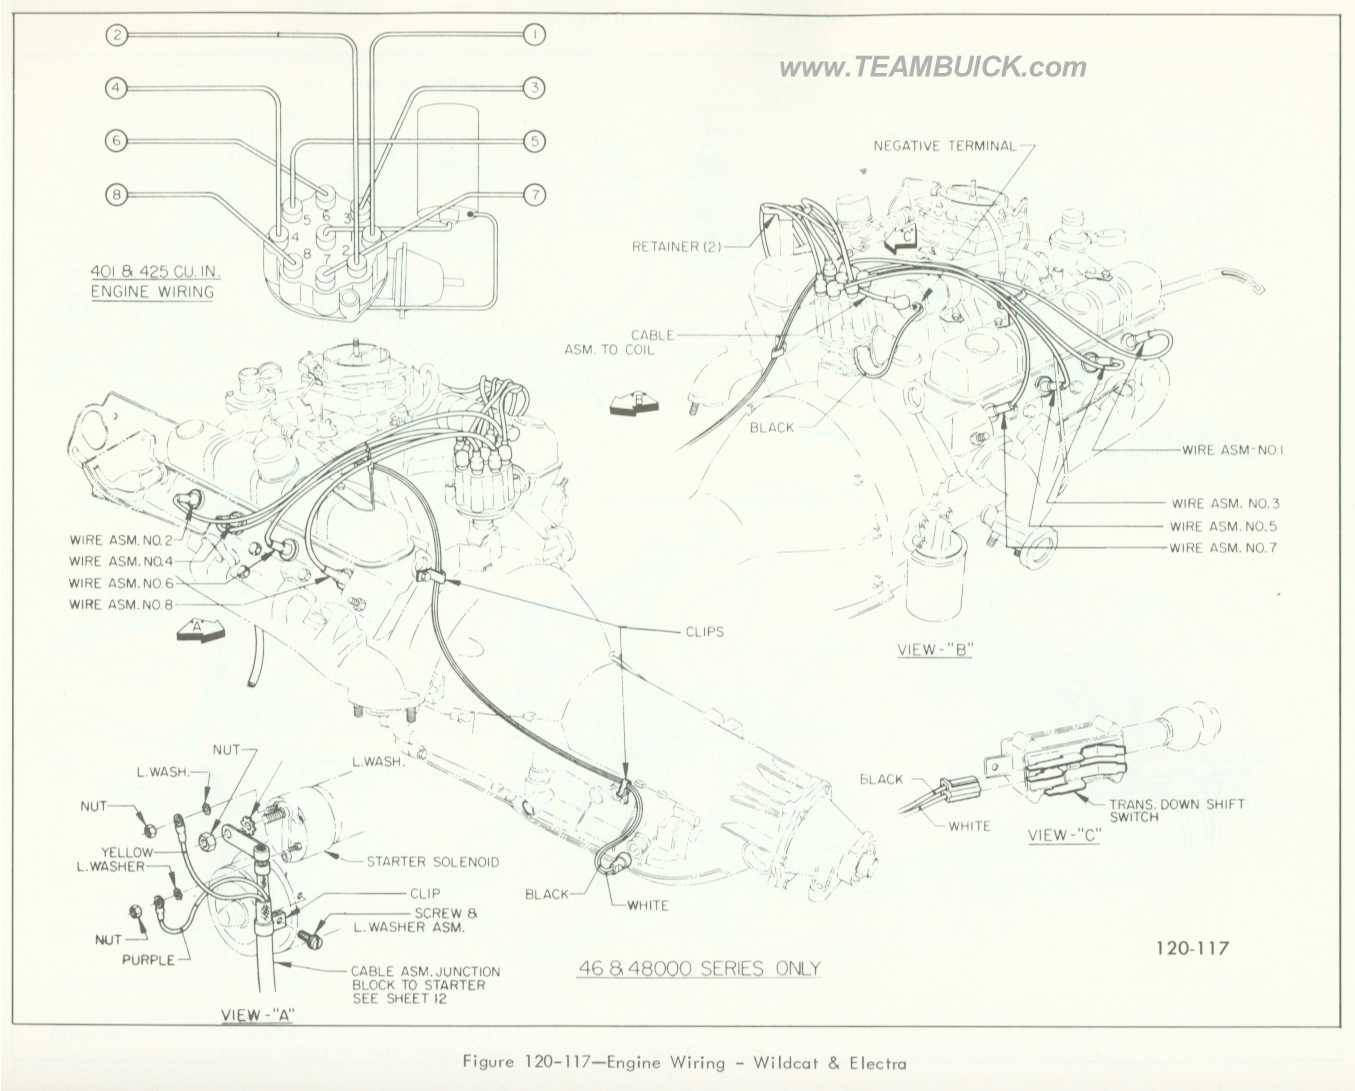 1966 Buick Wildcat and Electra, Engine Wiring